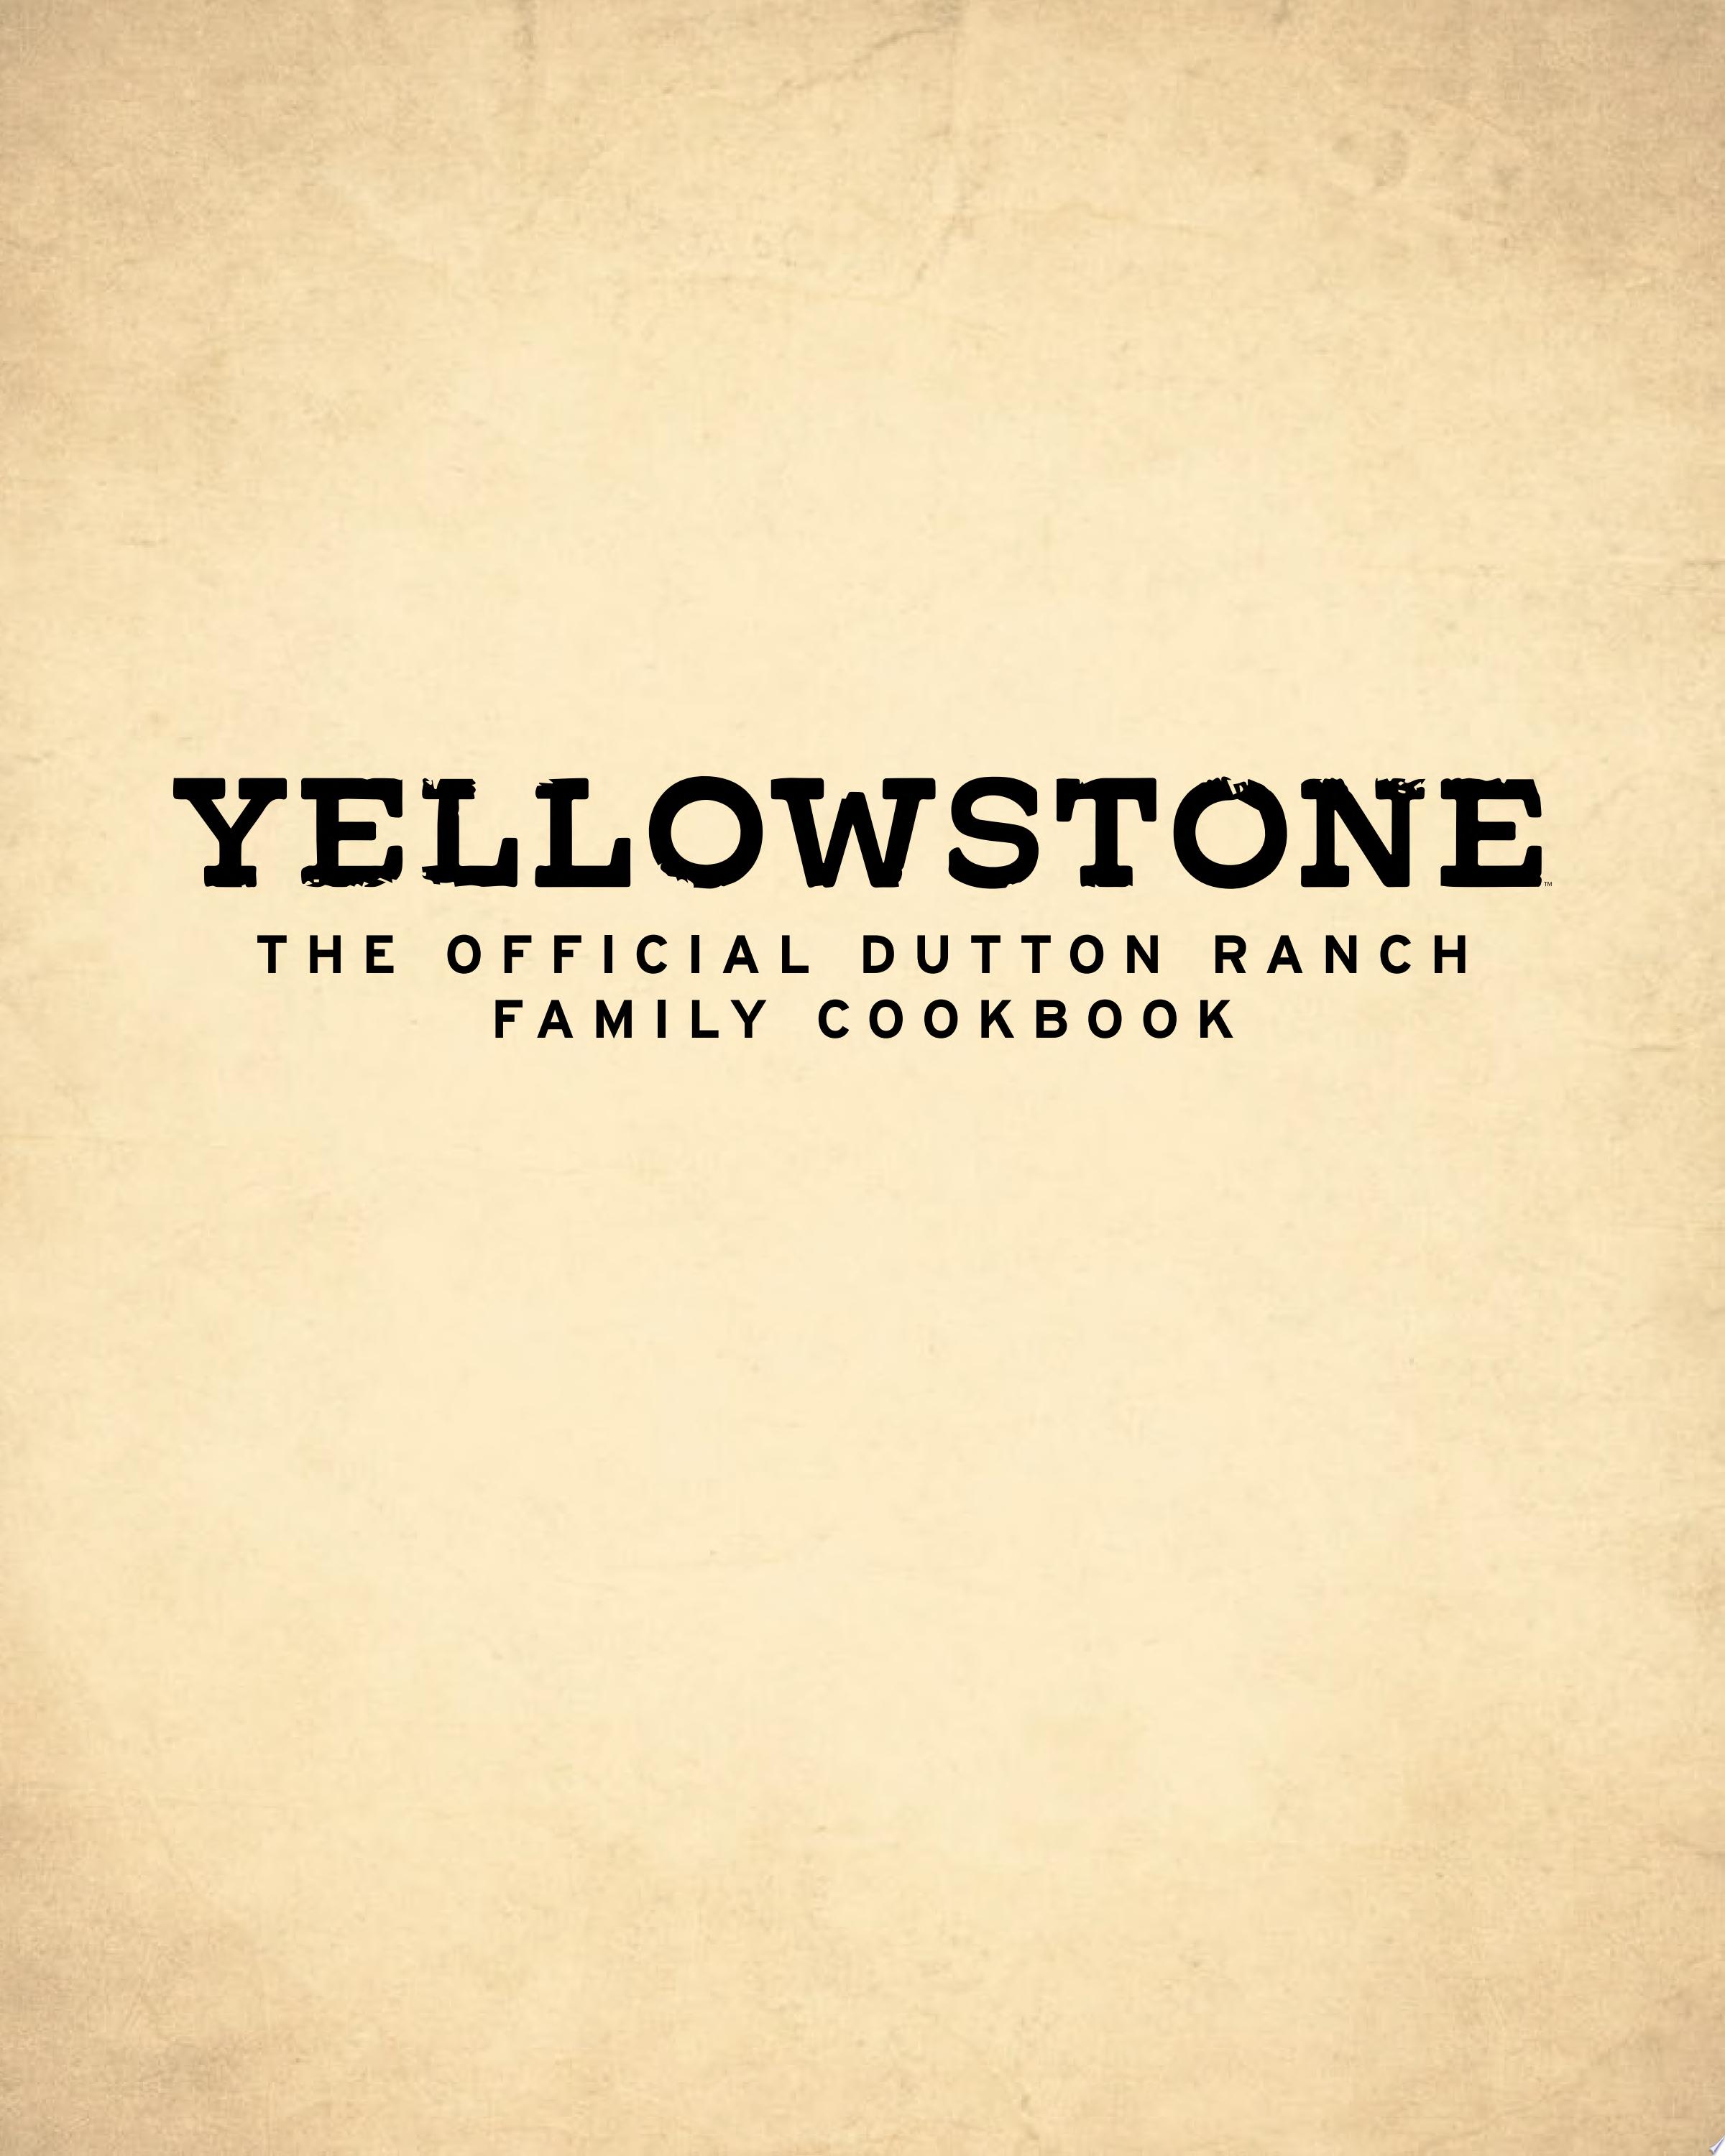 Image for "Yellowstone: The Official Dutton Ranch Family Cookbook"